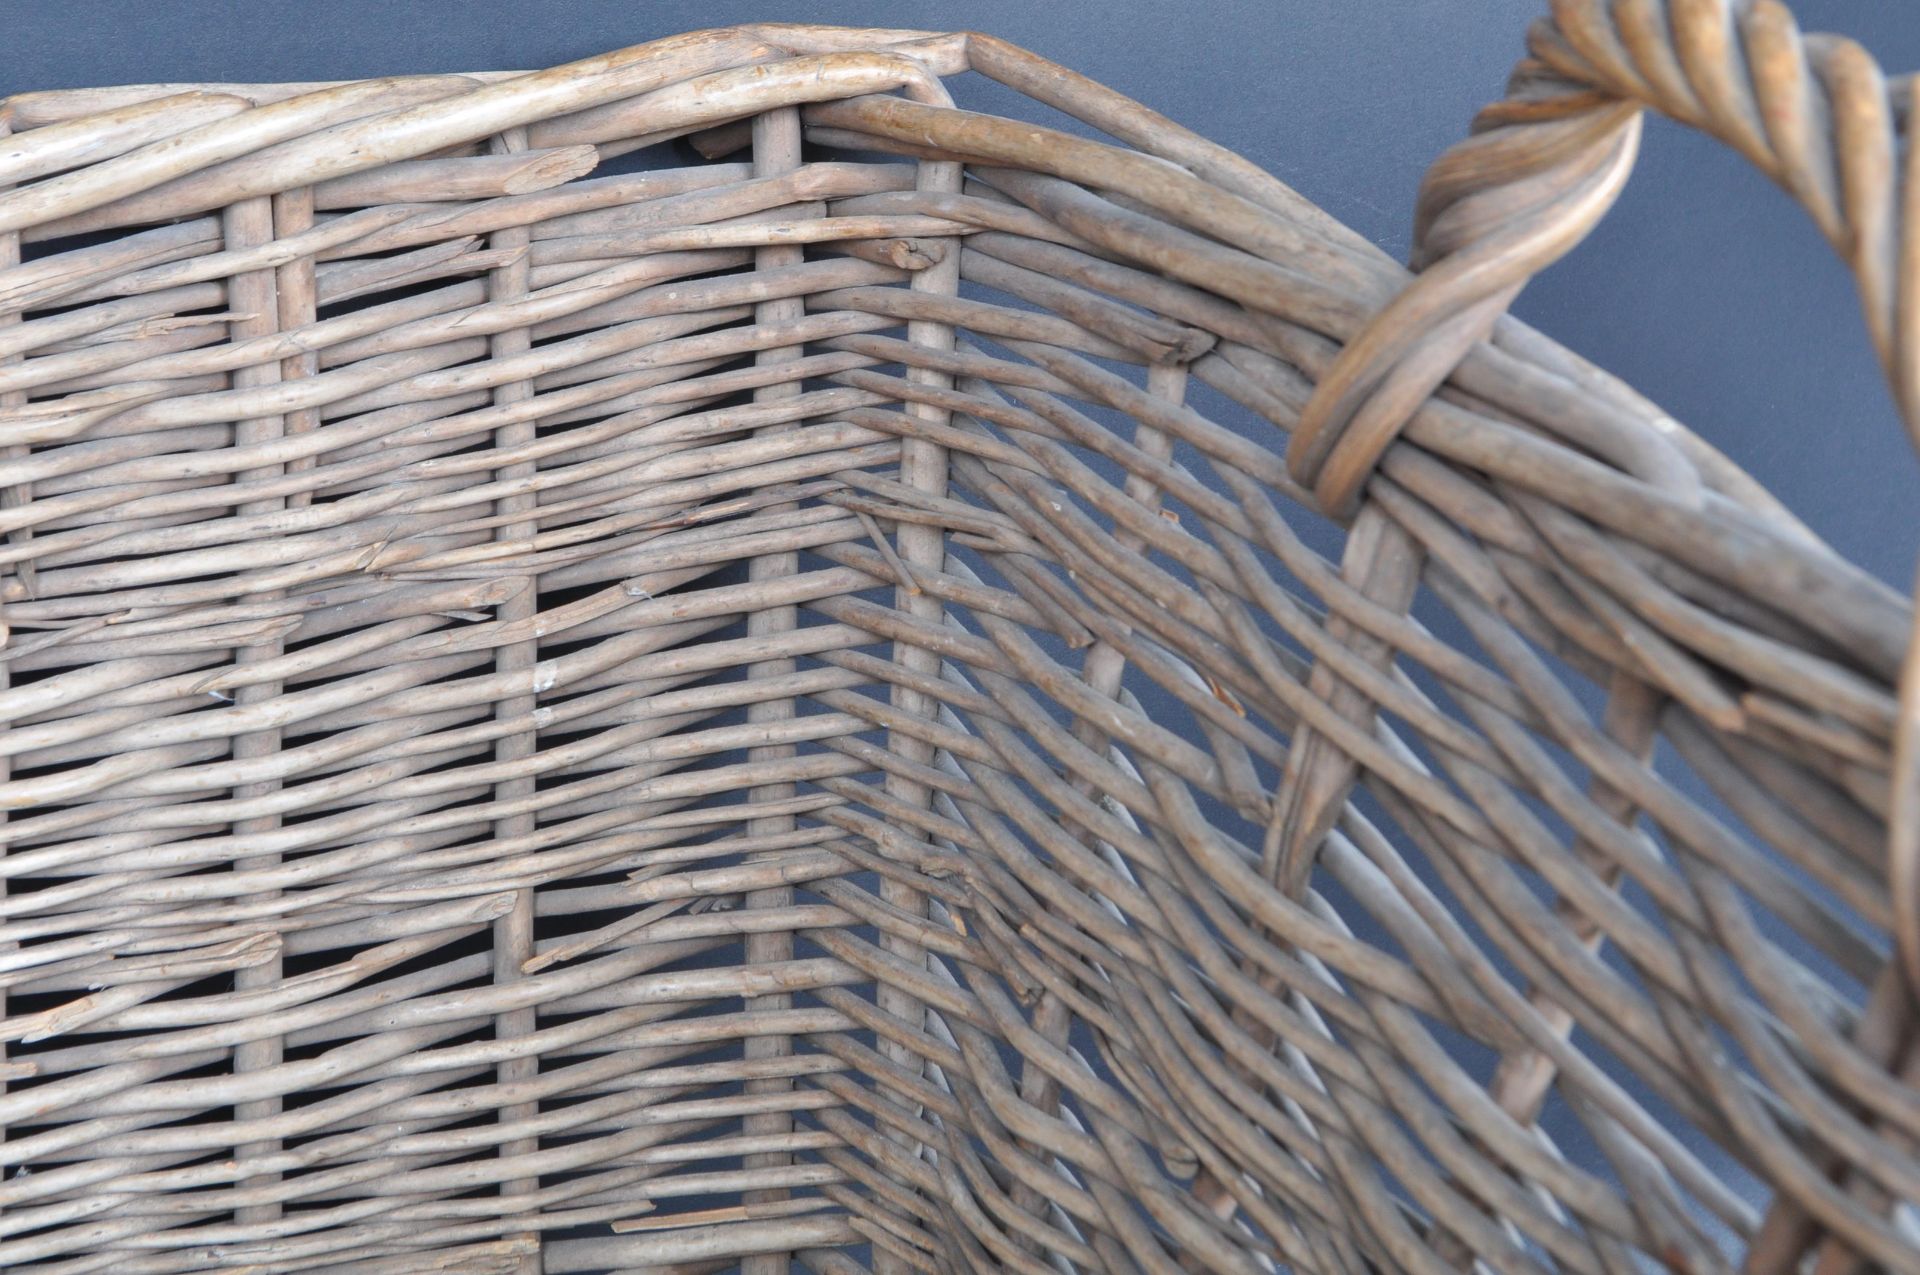 VINTAGE LATE 20TH CENTURY WICKER BASKET - Image 2 of 5